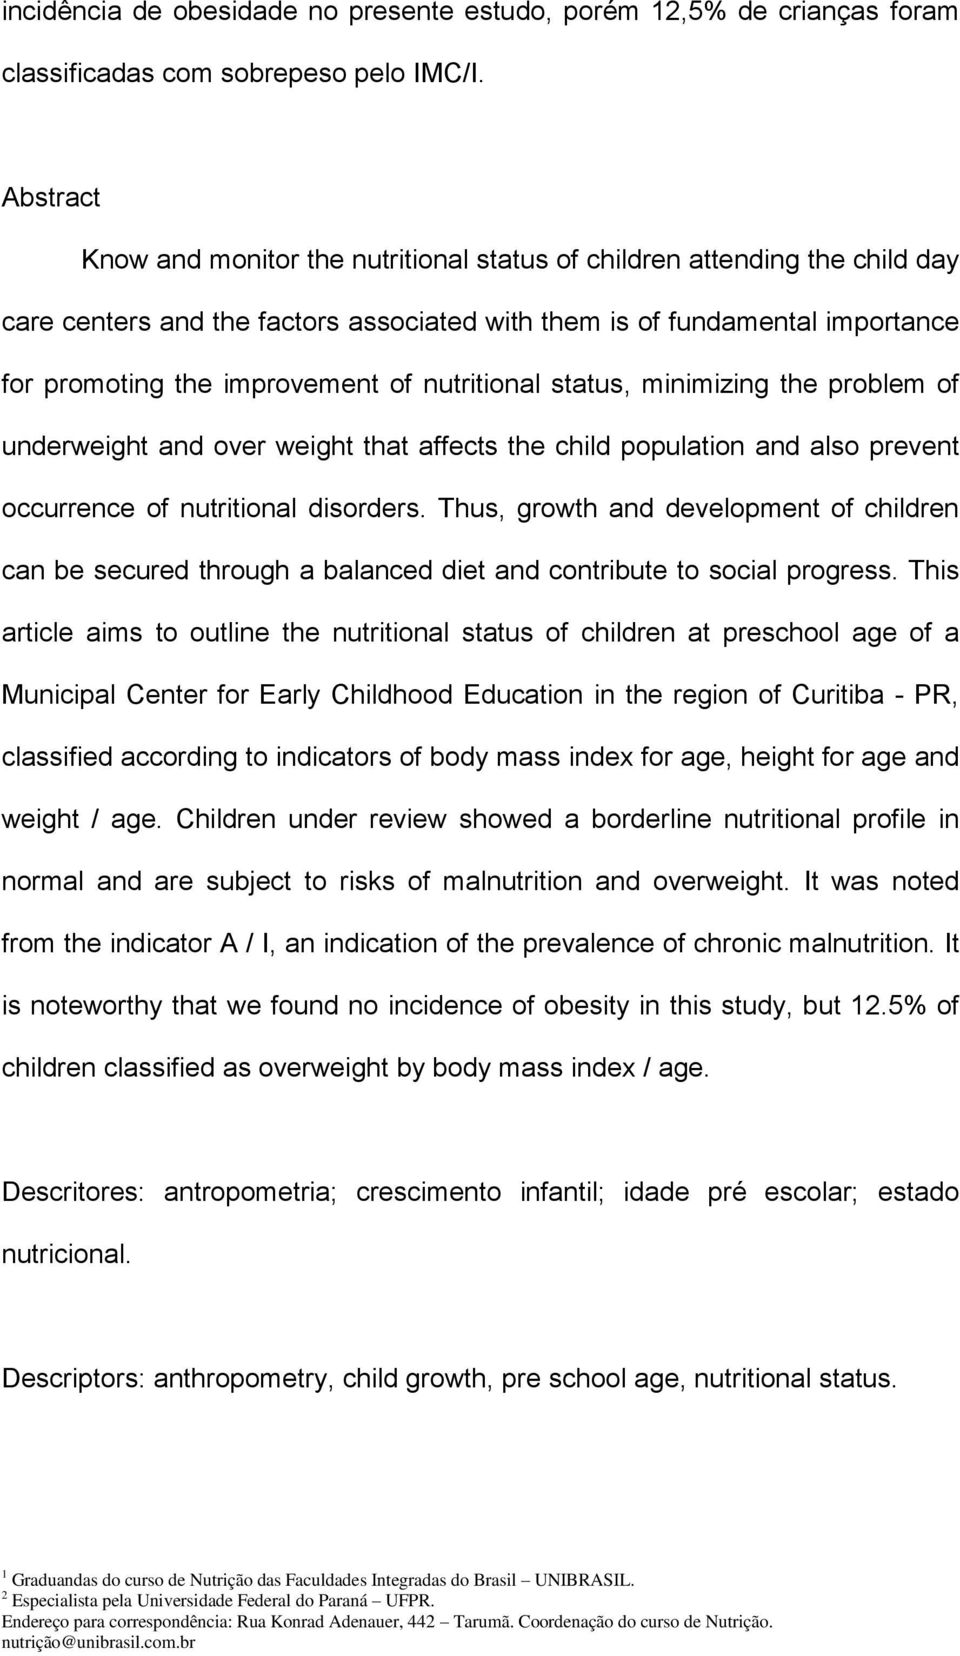 nutritional status, minimizing the problem of underweight and over weight that affects the child population and also prevent occurrence of nutritional disorders.